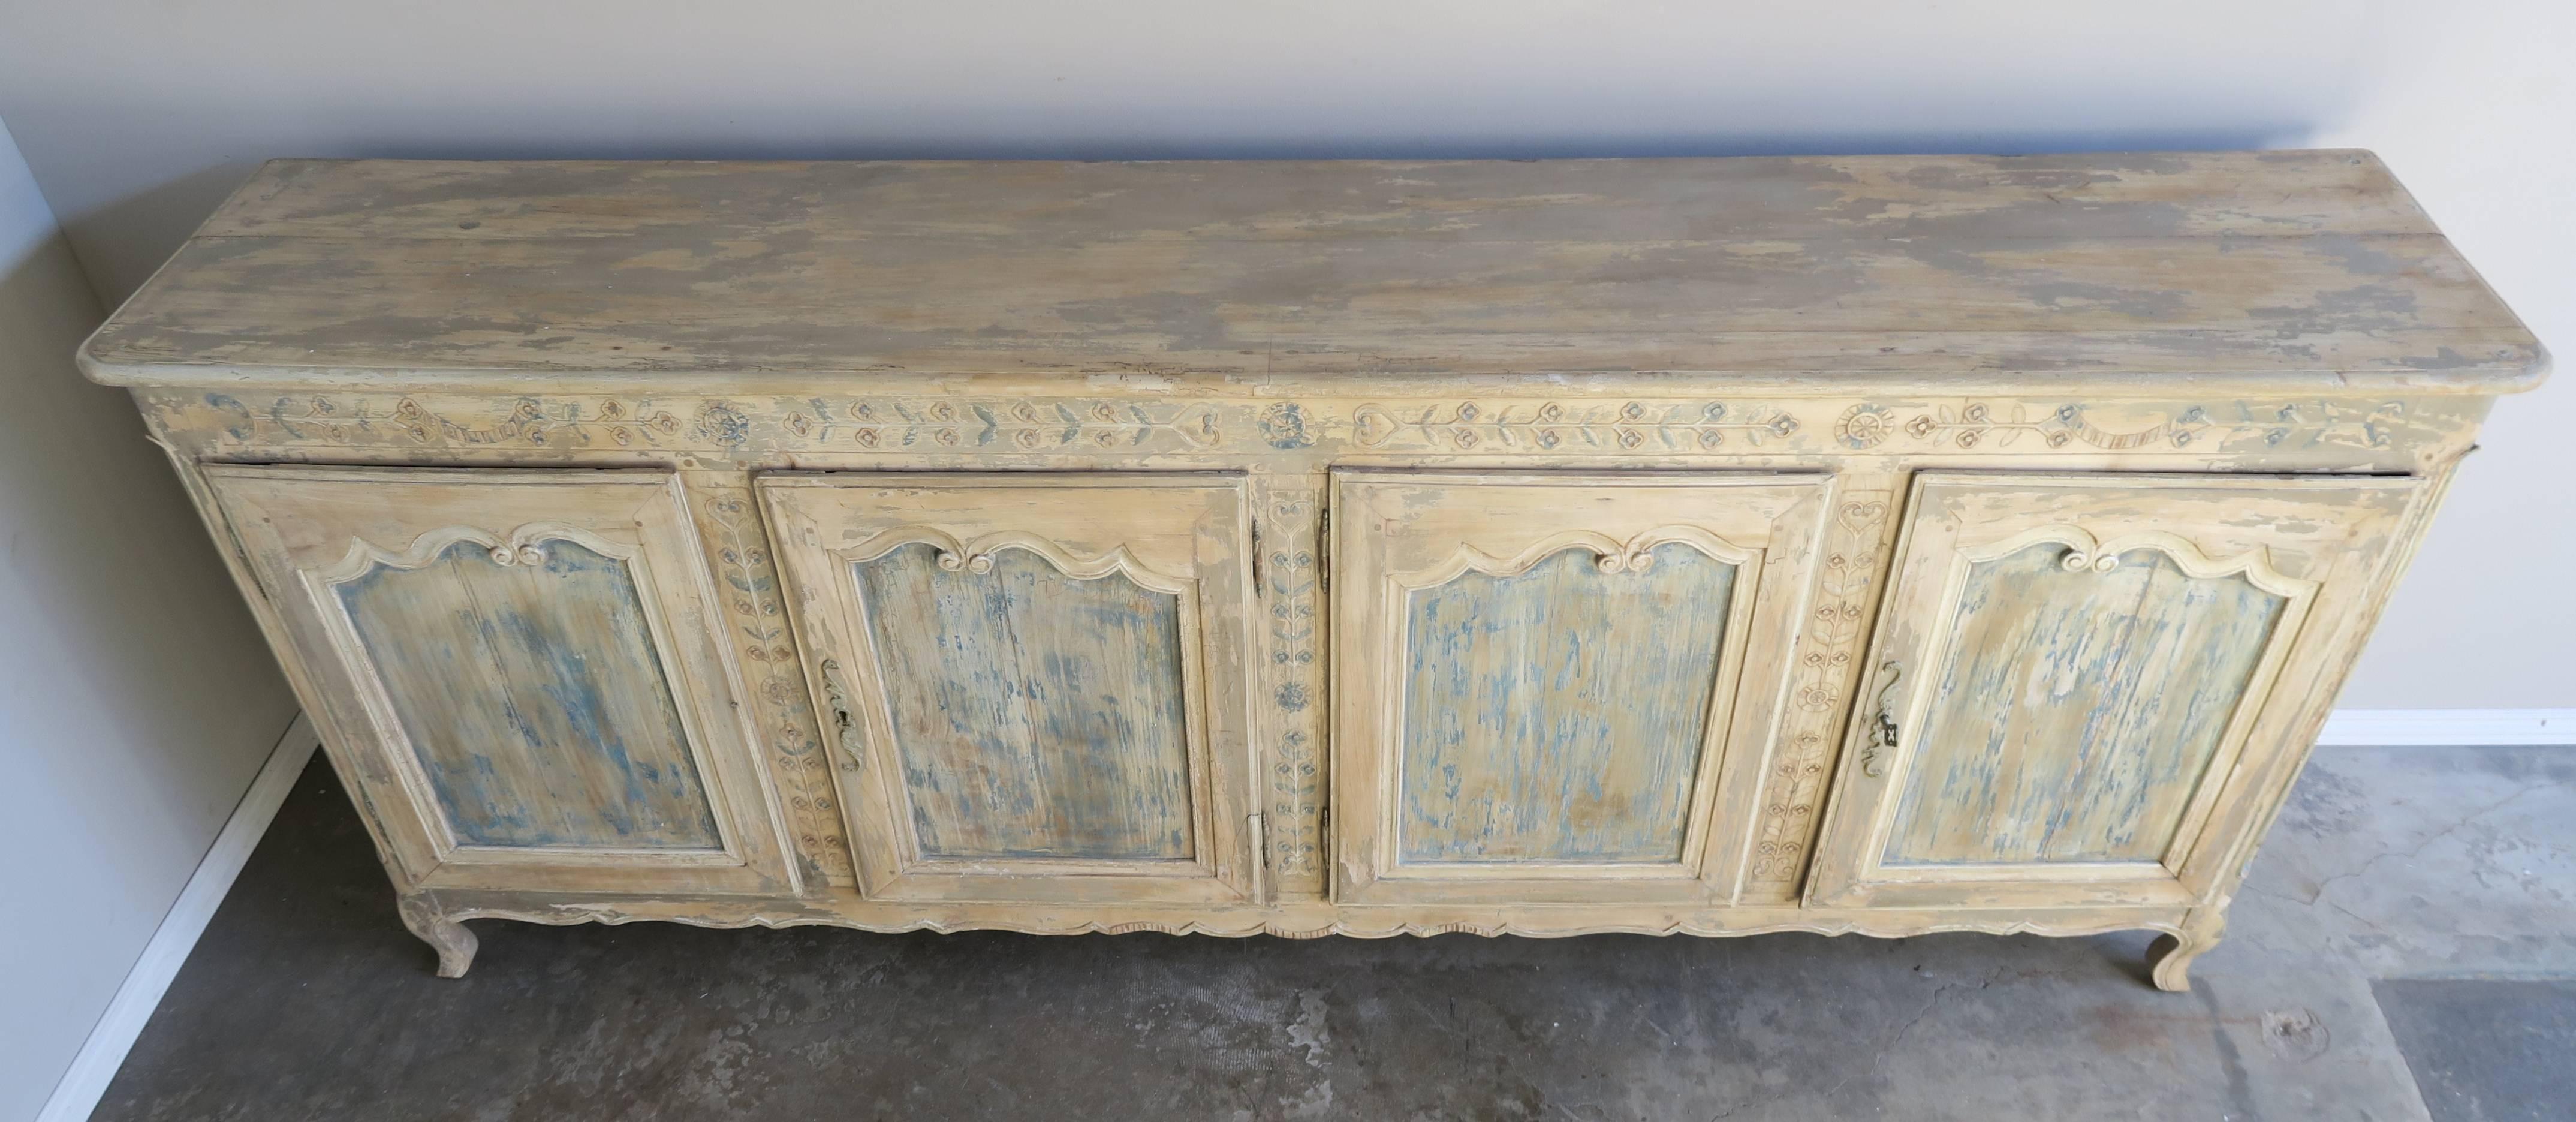 19th century French Louis XV style carved walnut buffet with a beautiful worn painted finish. The buffet stands on six legs, cabriole shaped legs in the front. There are four doors with original antique hardware.